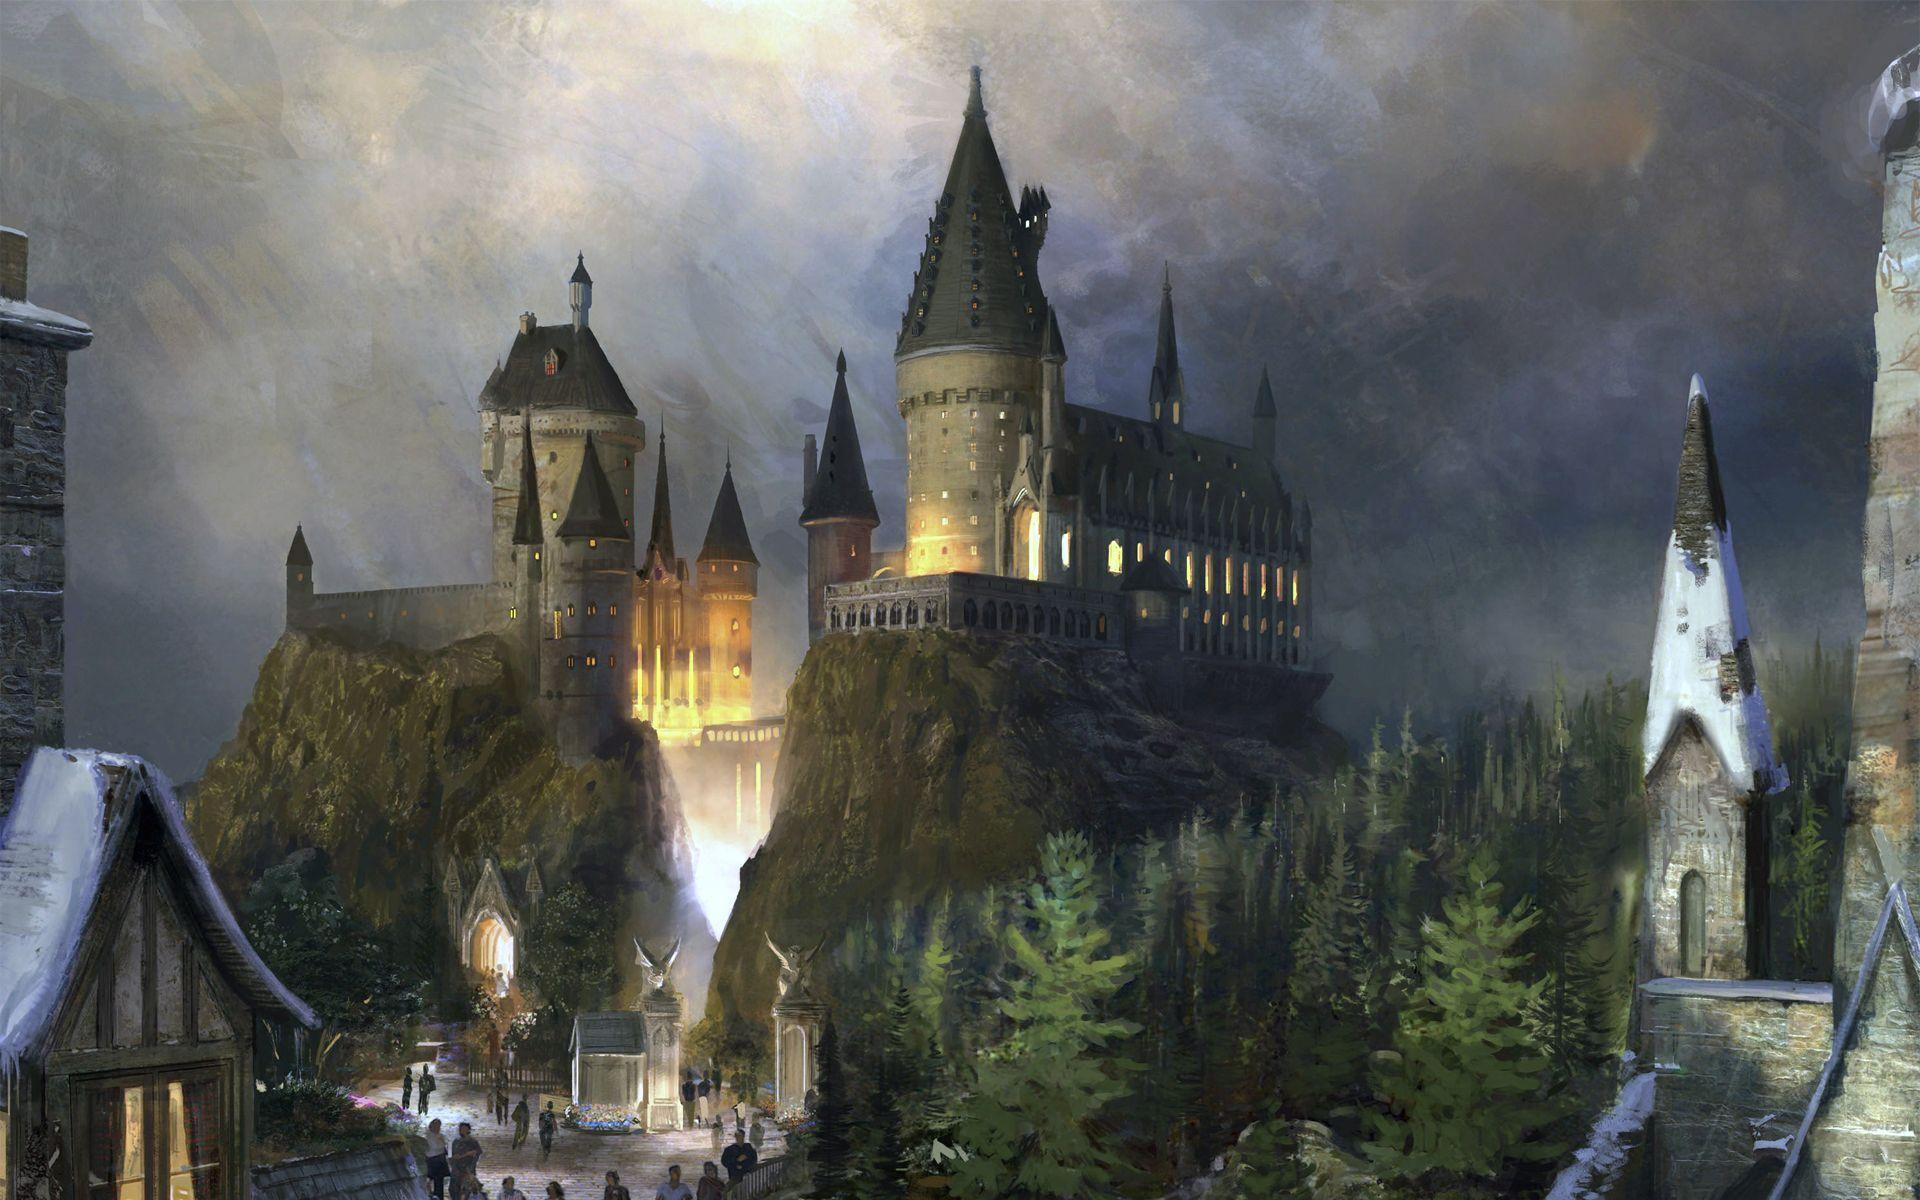 Harry Potter Landscape Wallpaper Hd - Download all photos and use them